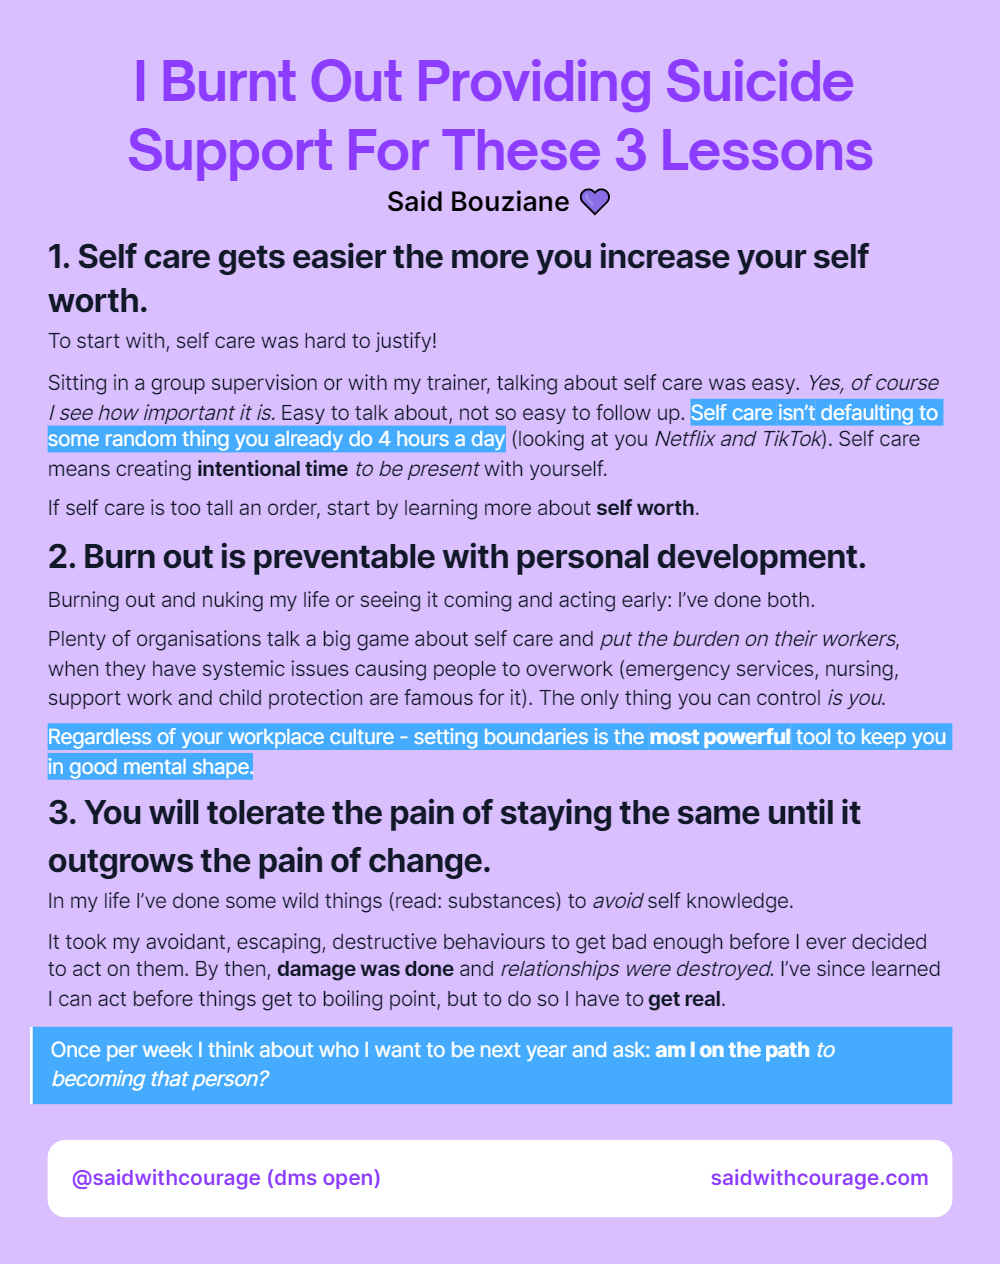 I Burnt Out Providing Suicide Support For These 3 Lessons